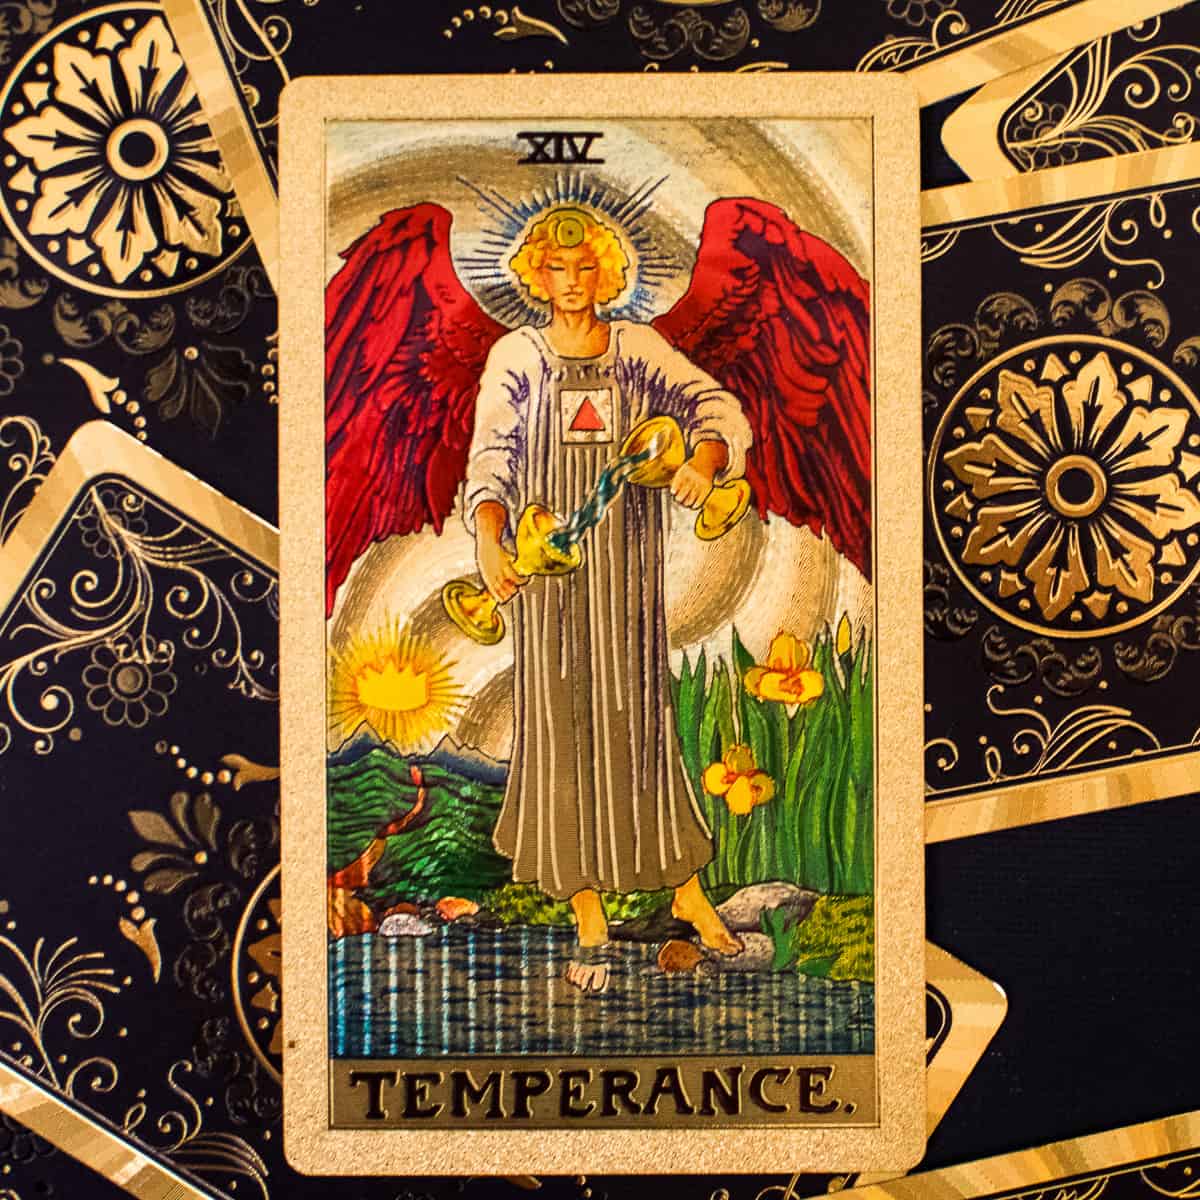 An angel standing with one foot on land and one foot in water depicted on a tarot card.